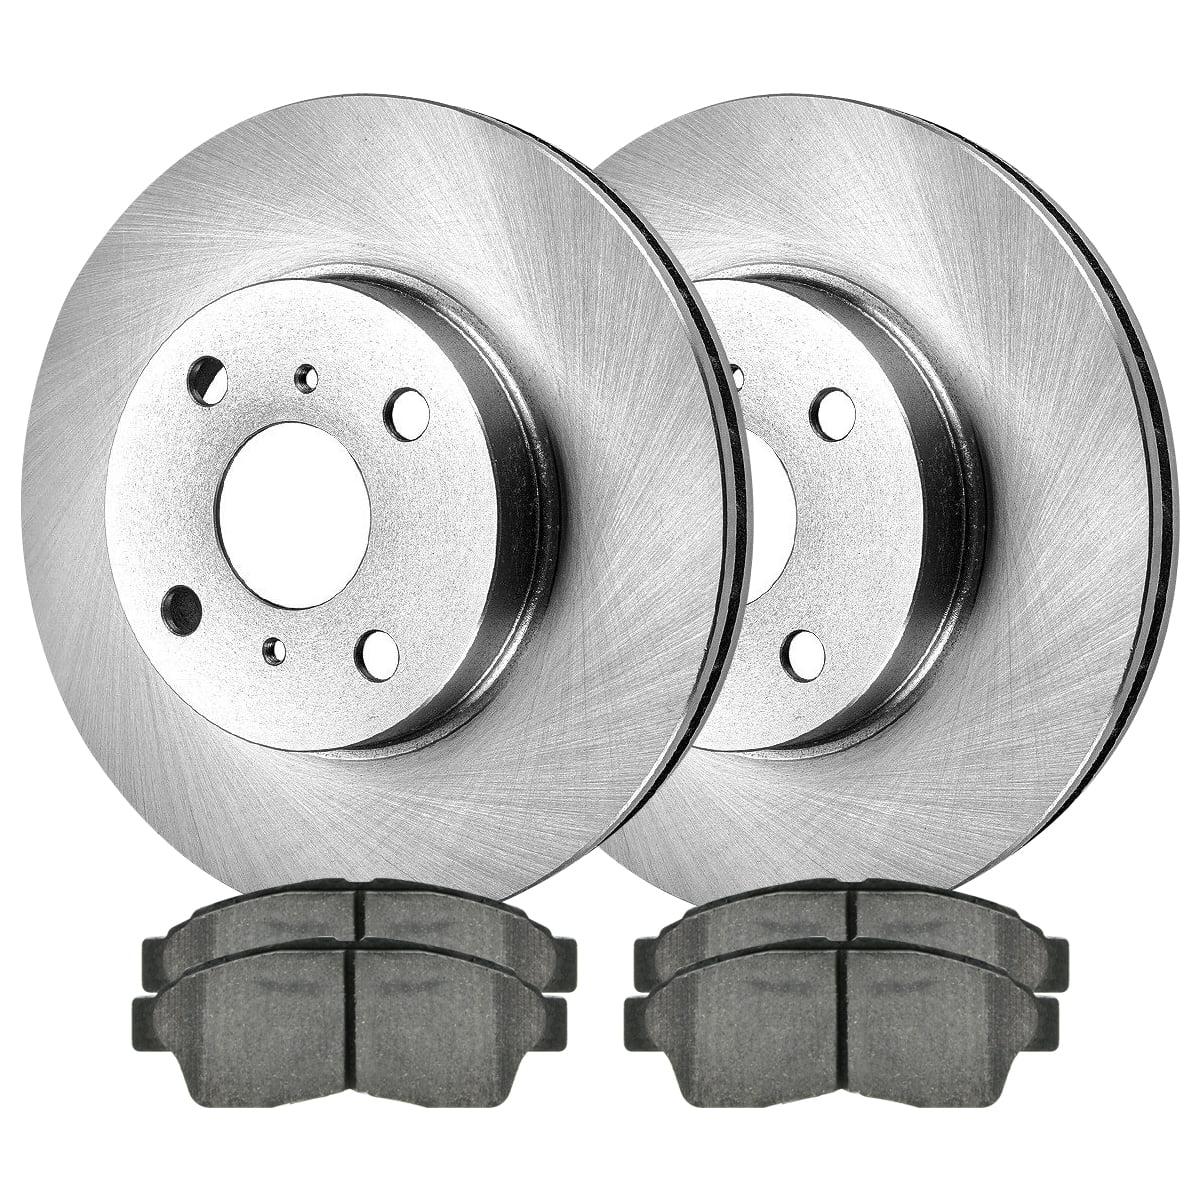 Front & Rear Brake Disc Rotors & Ceramic Pads For 1995 1996 1997 Toyota Avalon